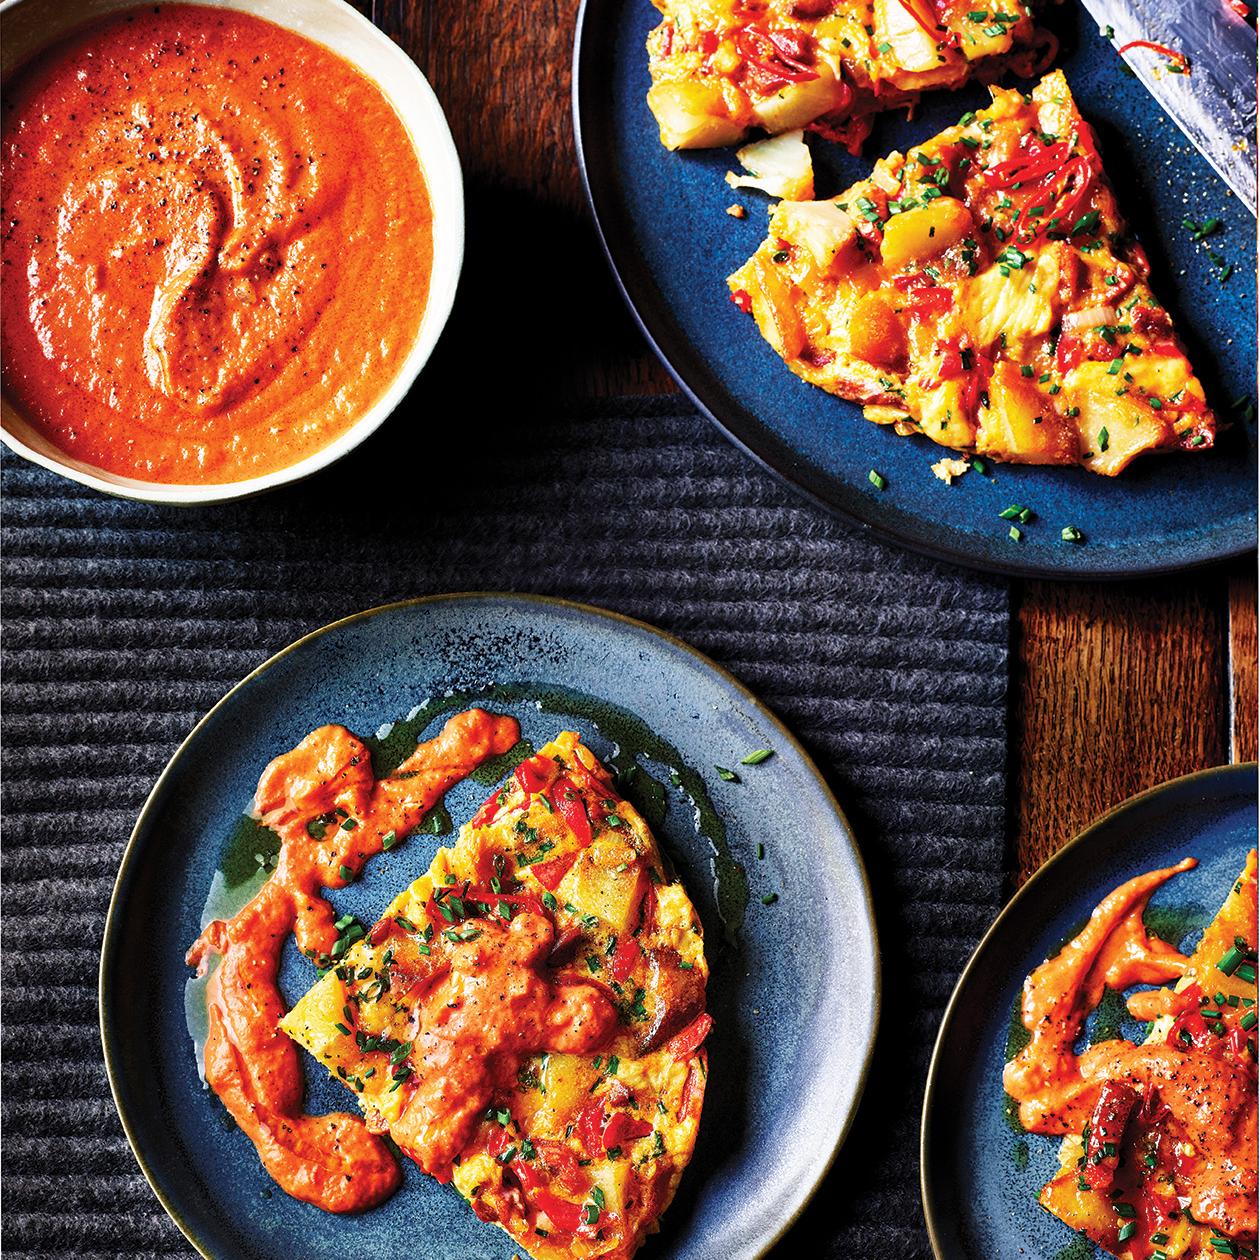 Spanish omelette with tomato sauce recipe